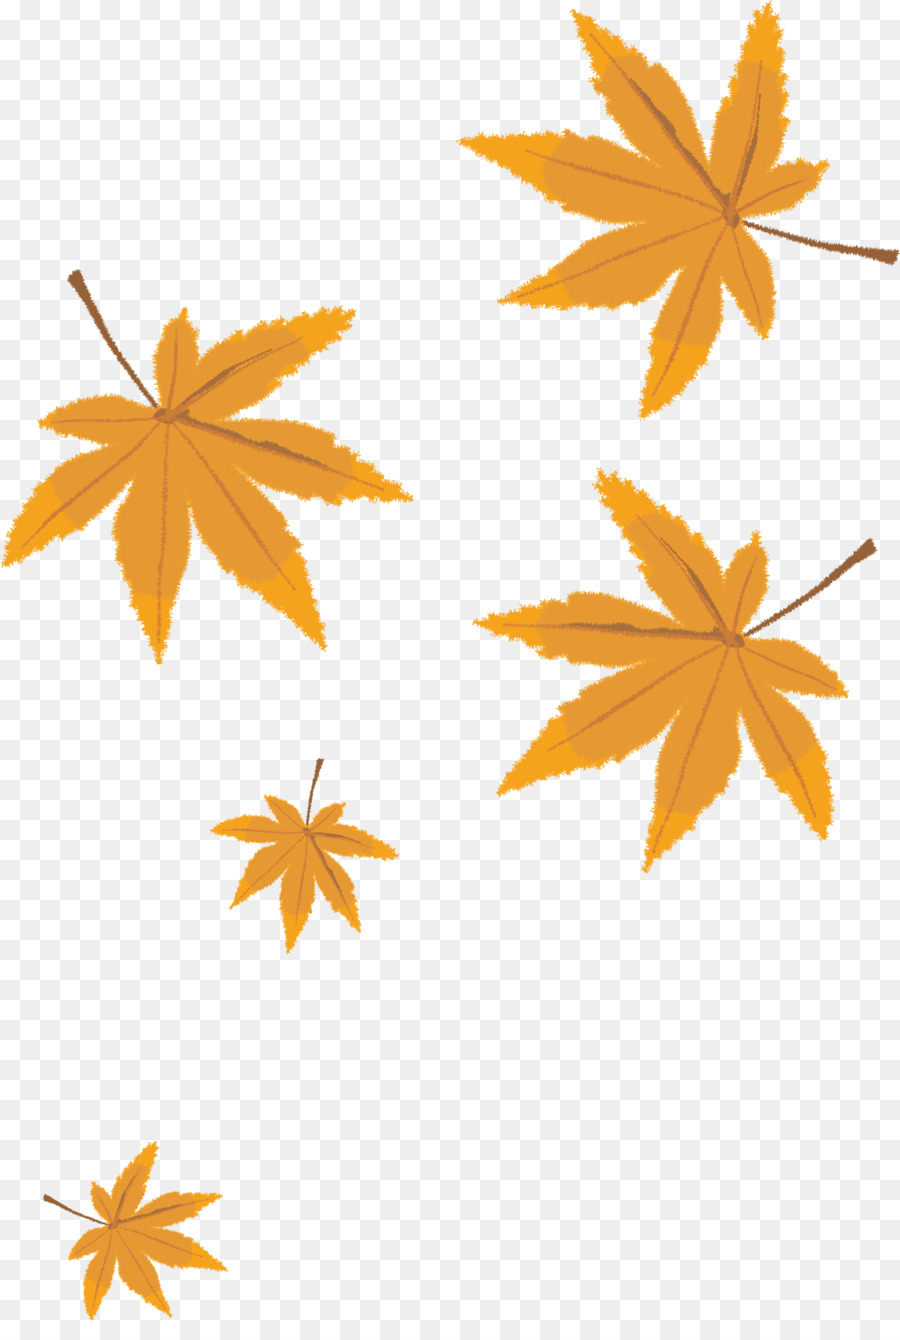 Leaf Cartoon - Autumn leaves png vector material png download - 1637*